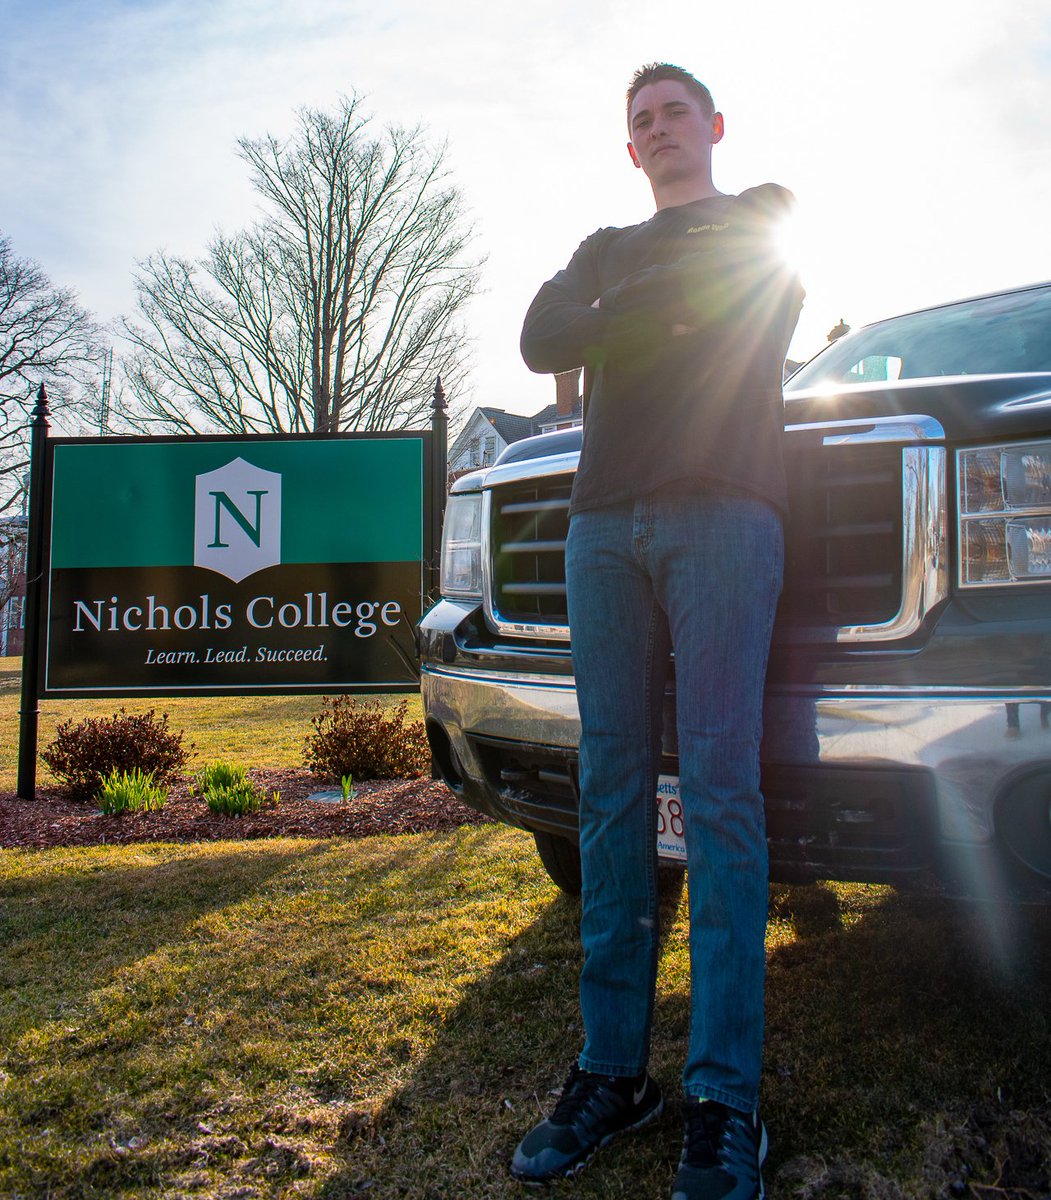 .@Nichols_College sophomore Jared Williamson, owner of the @Uber-like car service for Nichols students, is yet another example of #BisonBuildingBrands, #BisonBuildingBusiness. Read about him on #HeardOnTheHill. #WholeLeader Photo by senior @DuVarney50. heardonthehill.nichols.edu/2019/04/23/nic…